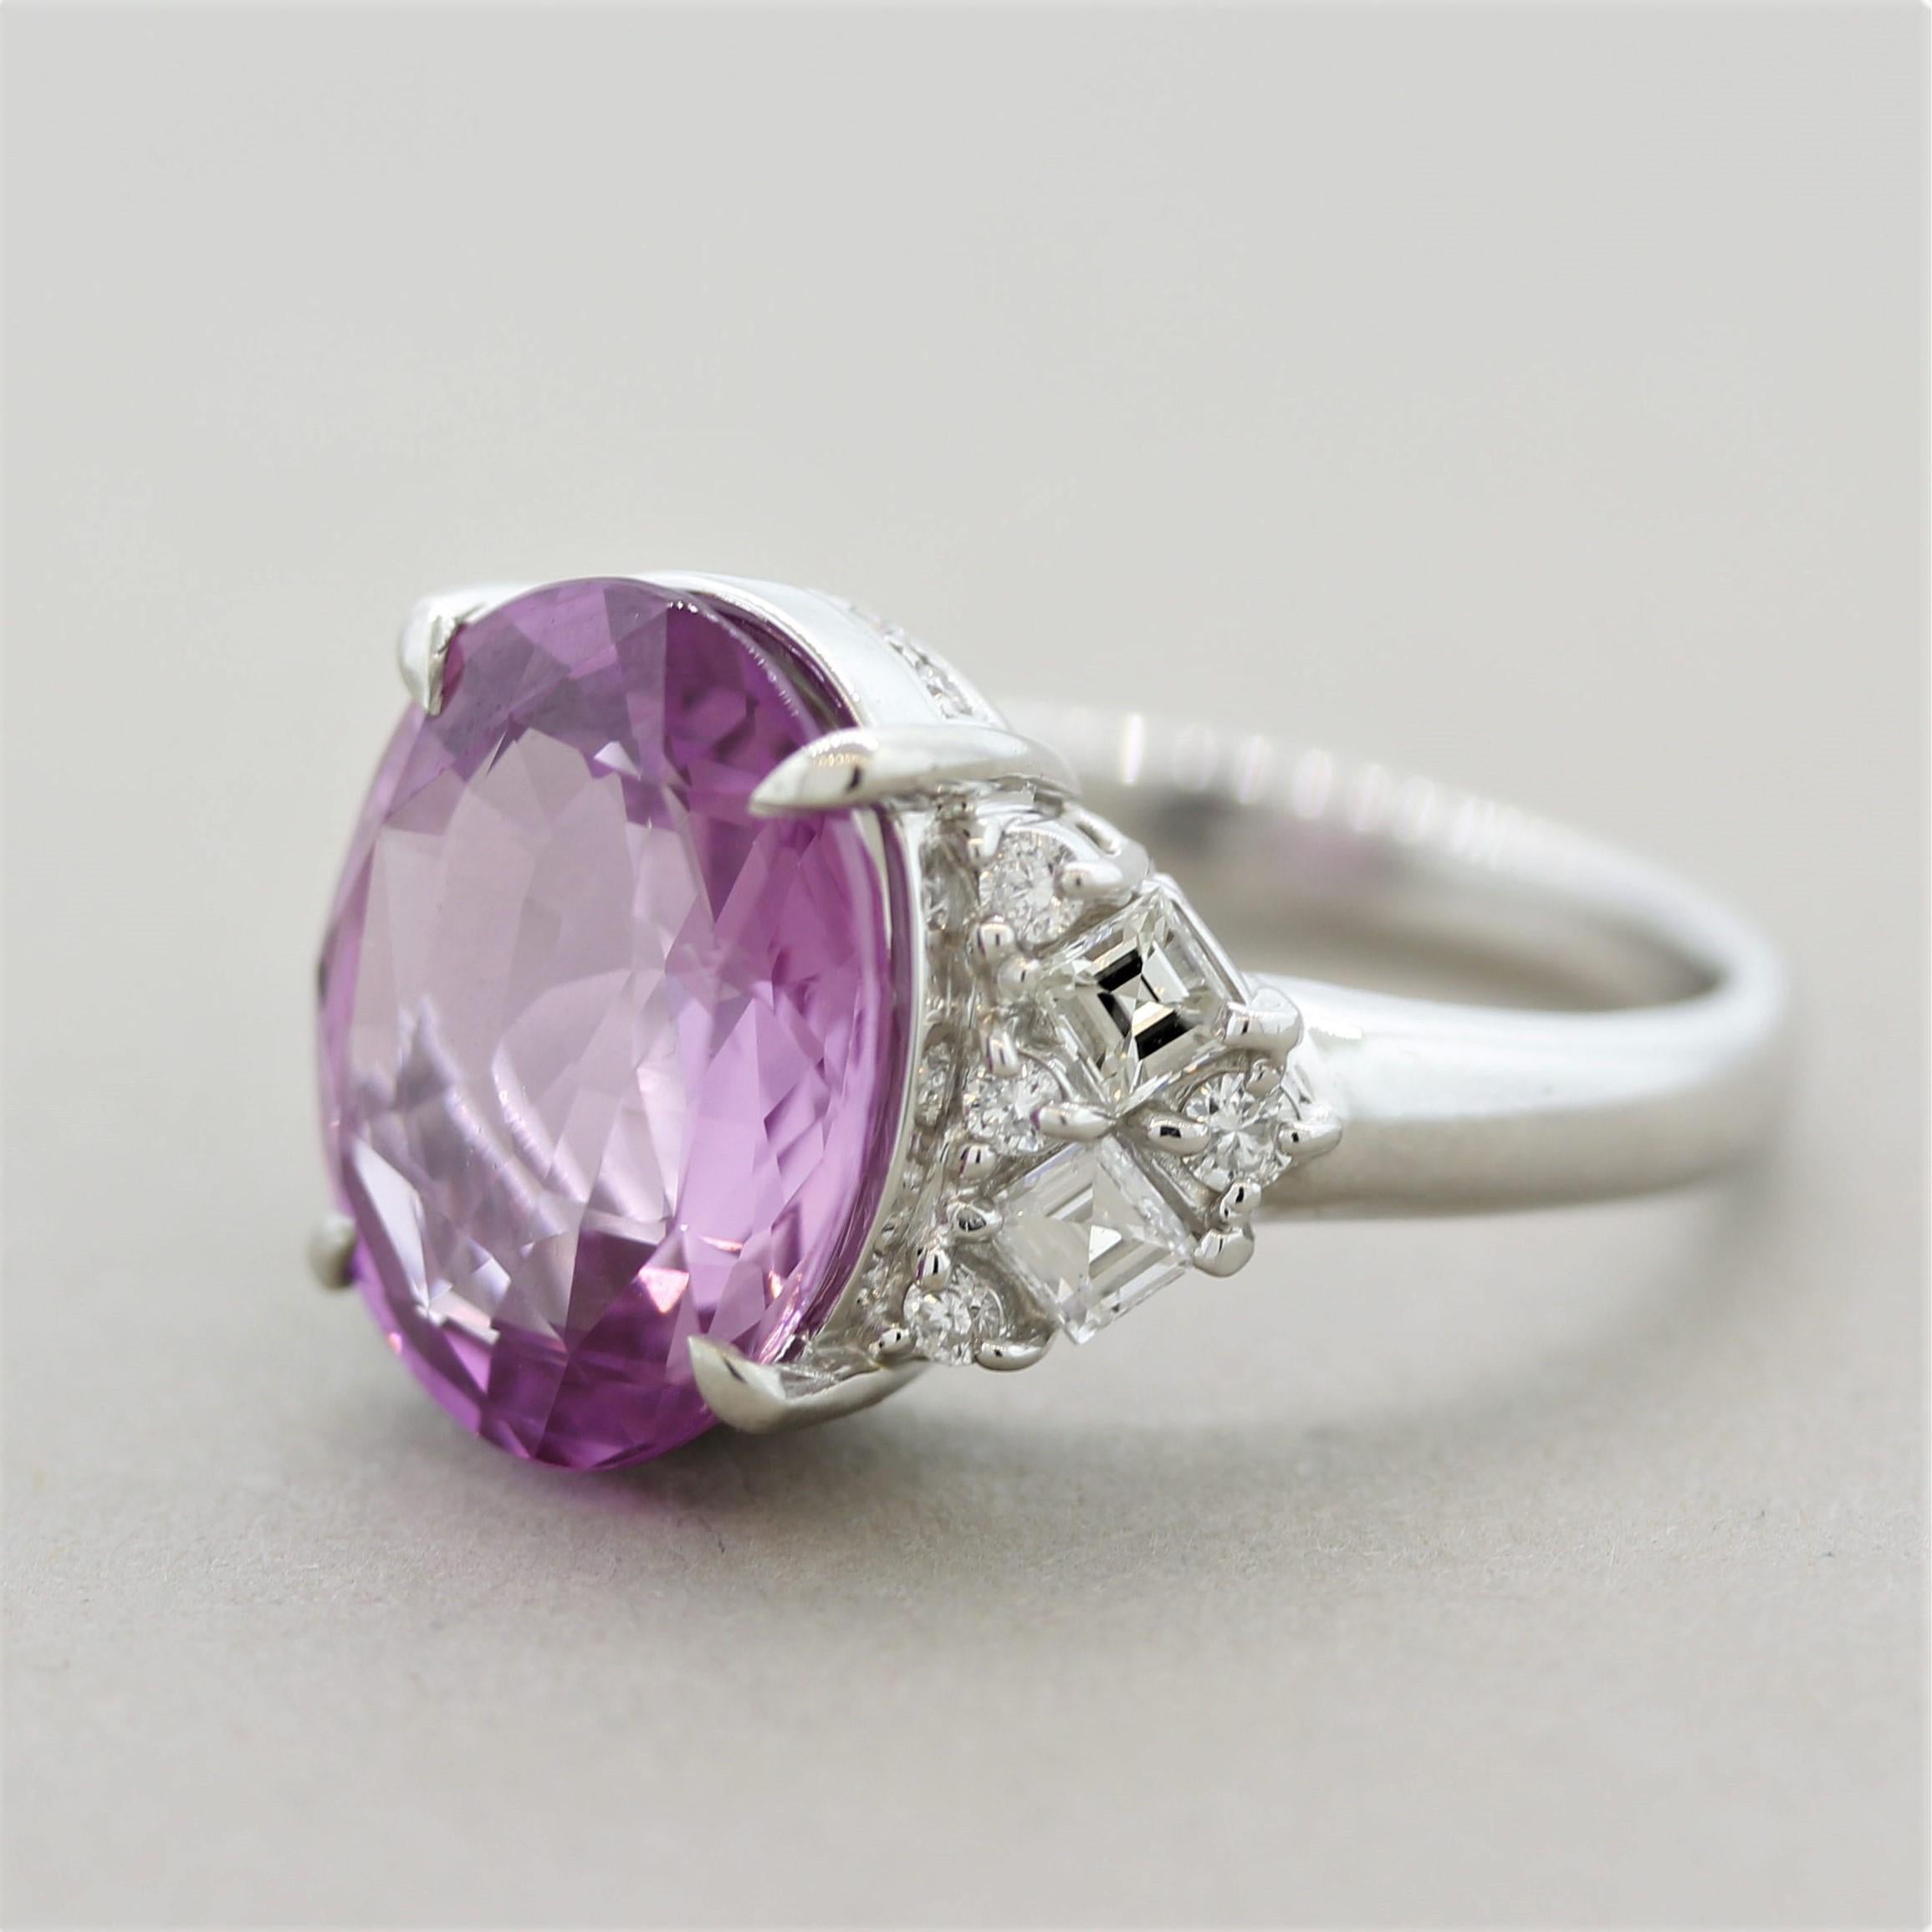 Mixed Cut 8.04 Carat Pink Sapphire Diamond Platinum Ring, GIA Certified For Sale